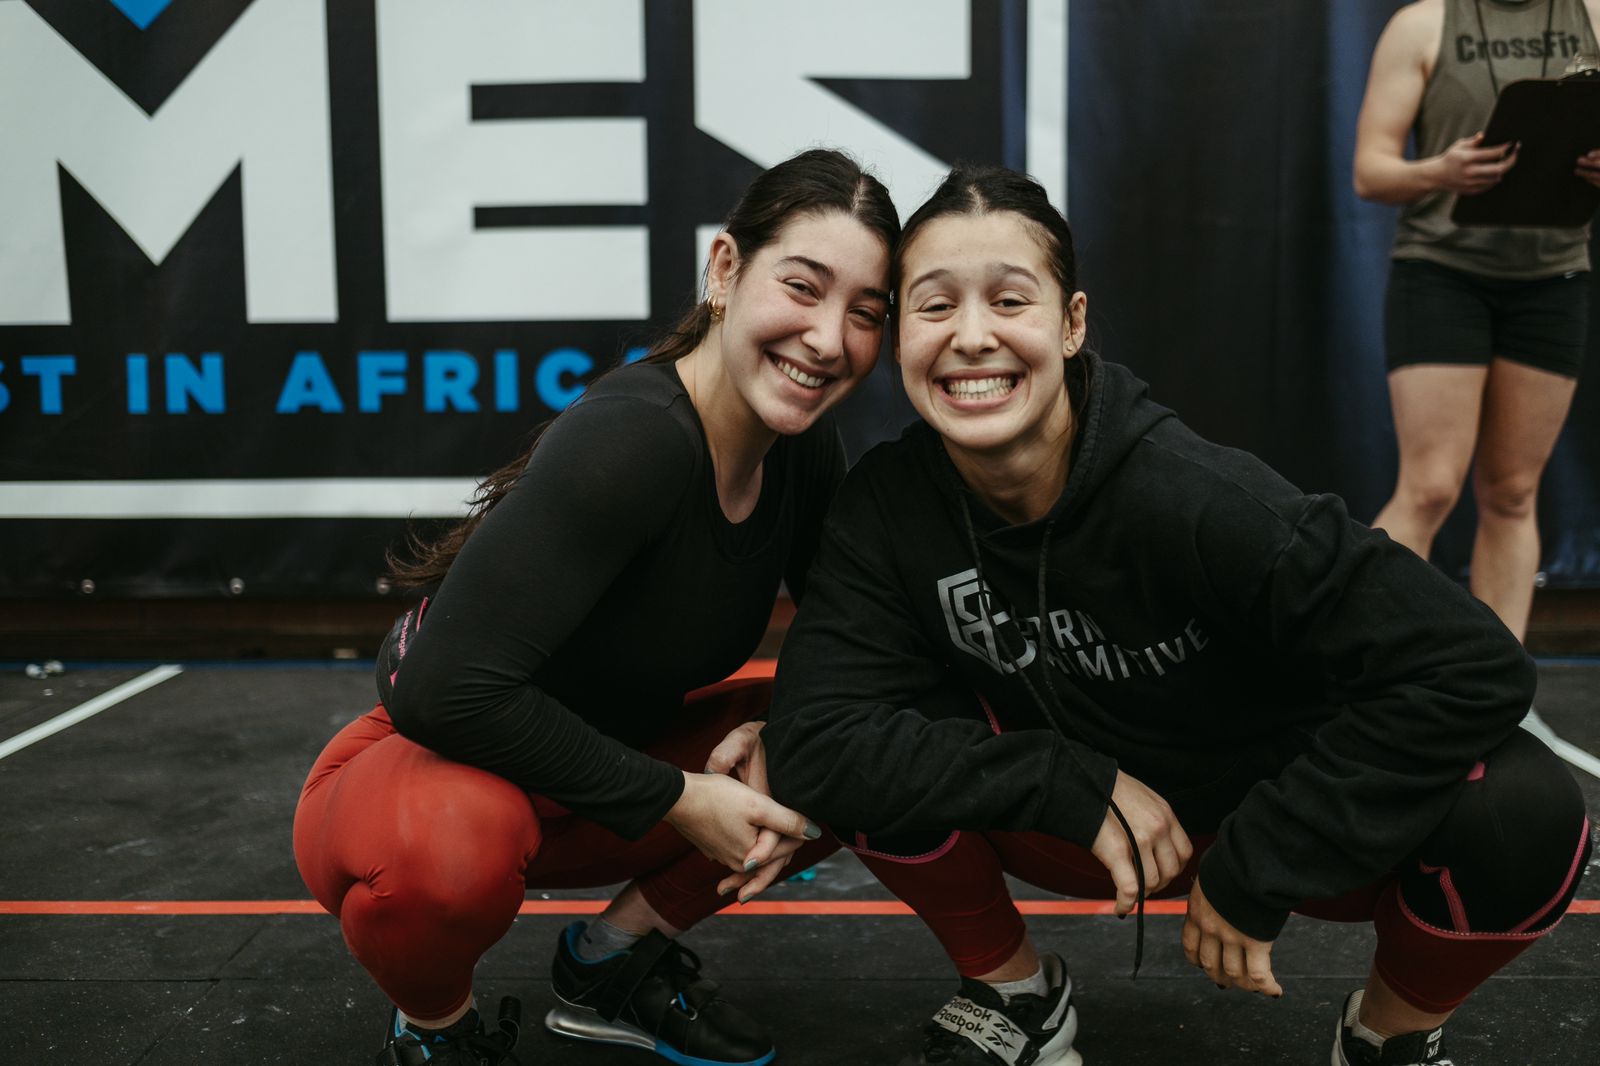 2023 Semifinals and CrossFit Games Prize Purse Increases